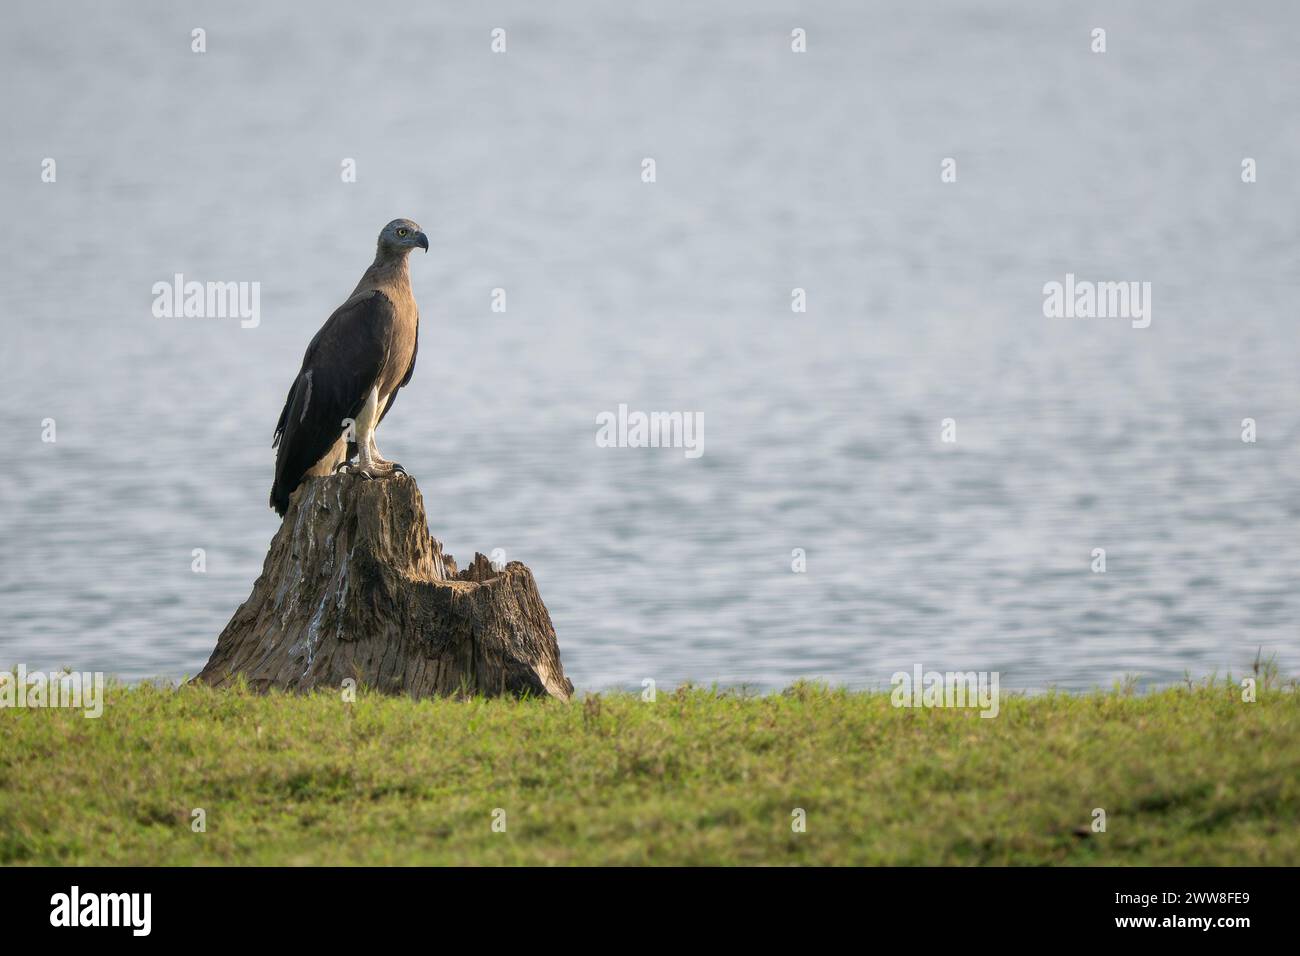 Grey-headed Fish-eagle - Ichthyophaga ichthyaetus, large gray and brown eagle from Asian woodlands and fresh waters, Nagarahole Tiger Reserve, India. Stock Photo